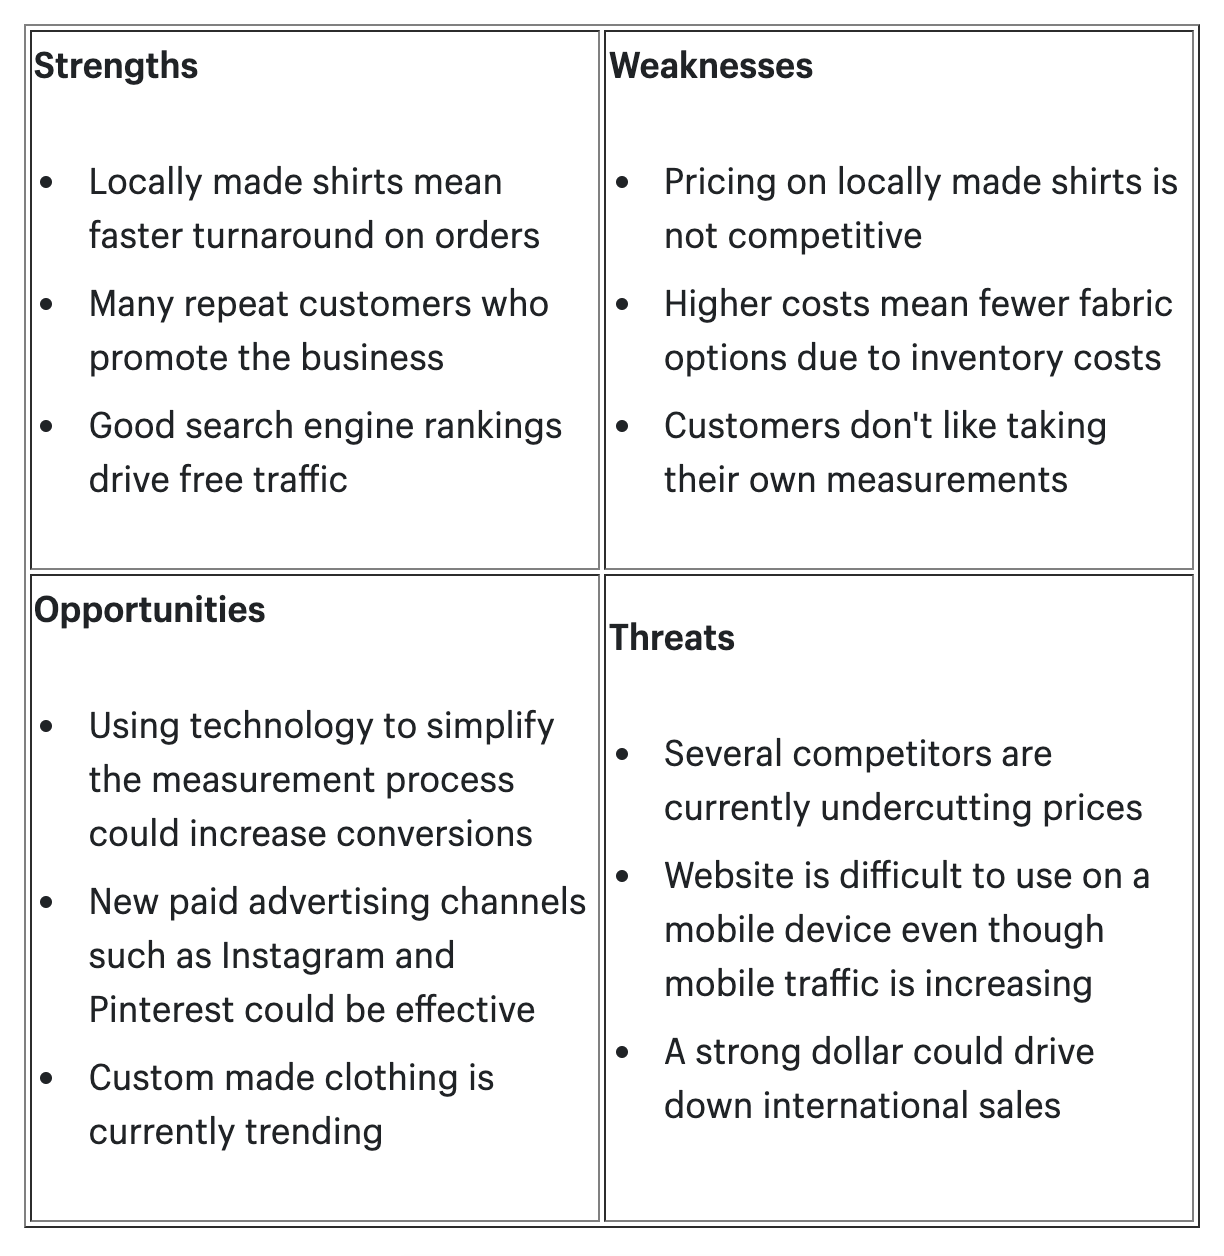 SWOT analysis table showing strengths, weaknesses, opportunities and threats